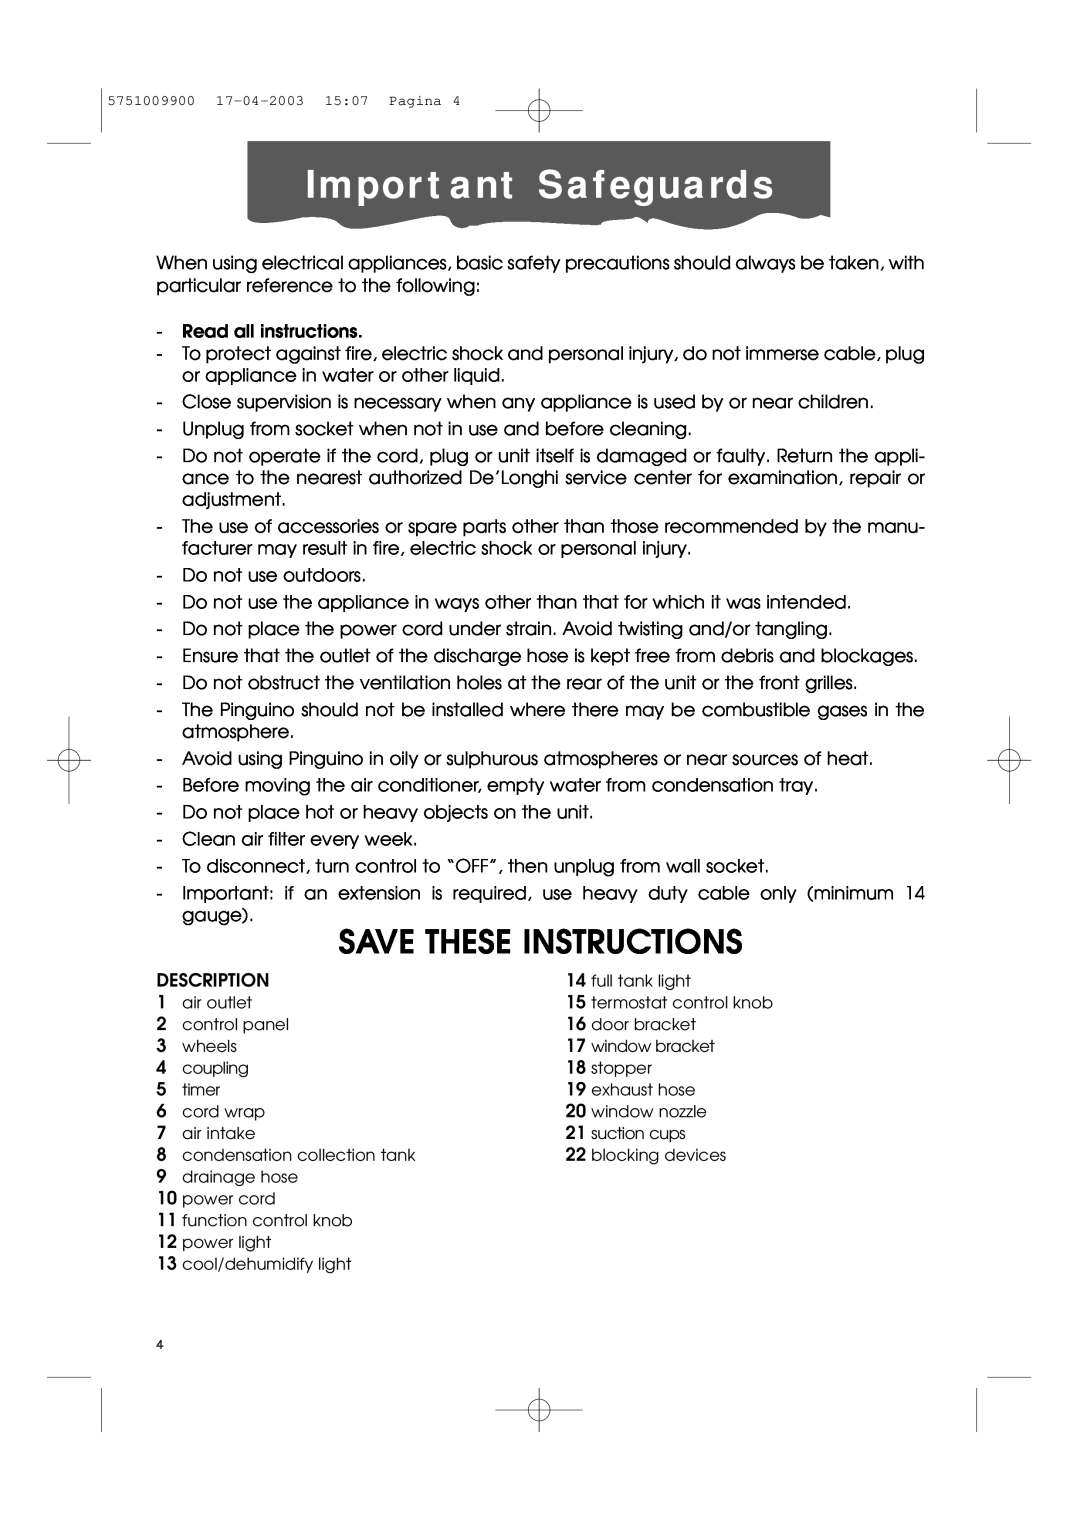 DeLonghi Pac 1000 manual Important Safeguards, Save These Instructions 